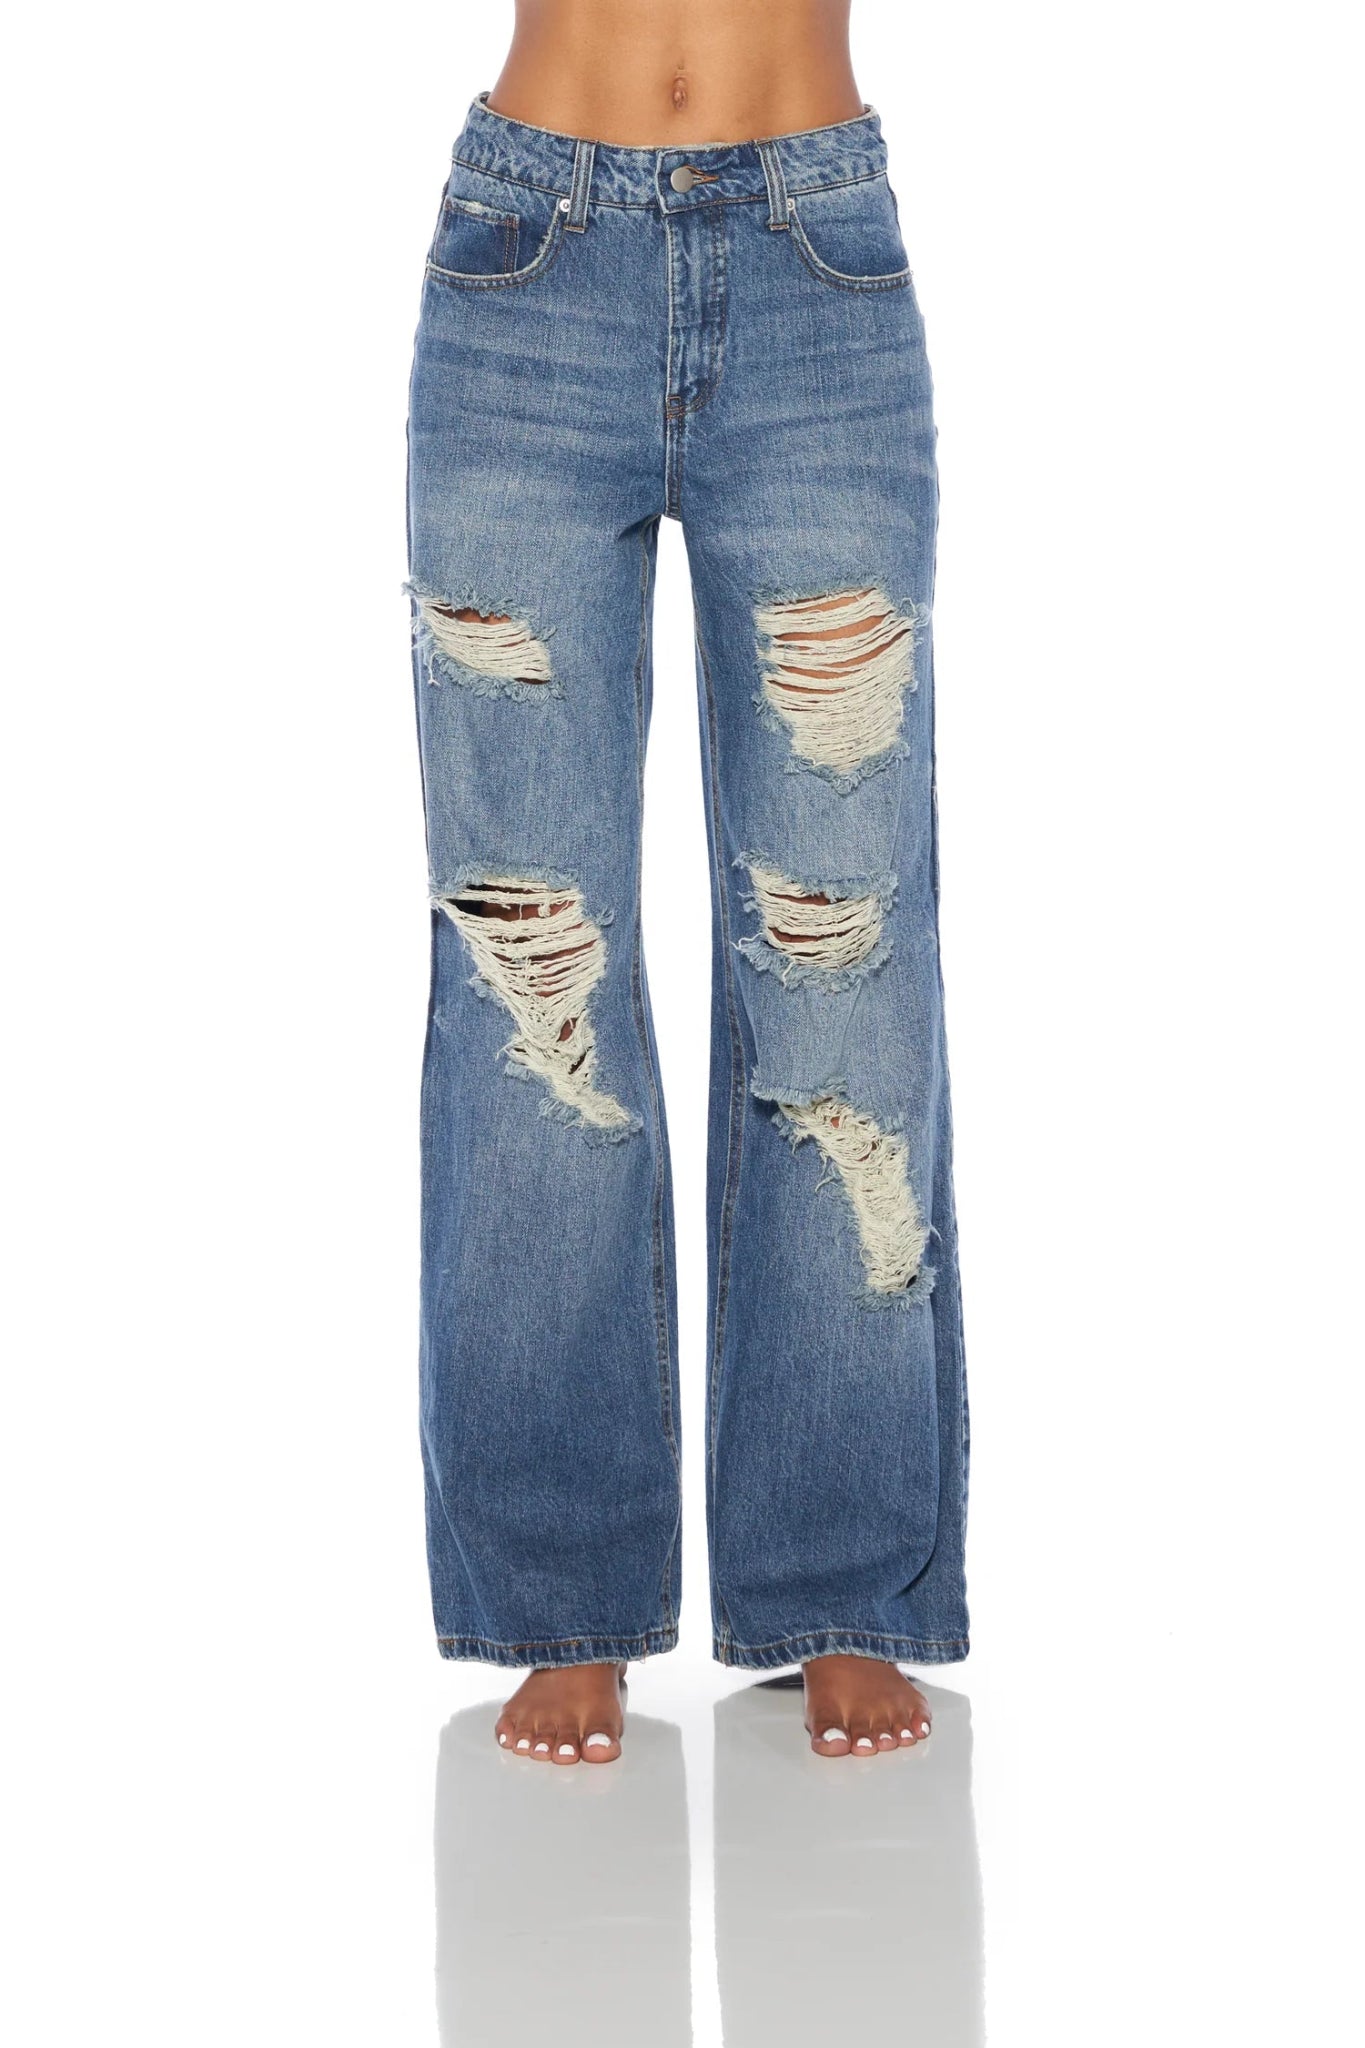 Madison High Waisted BAGGY Loose Fitting Jean in Carla Wash - Something about Sofia